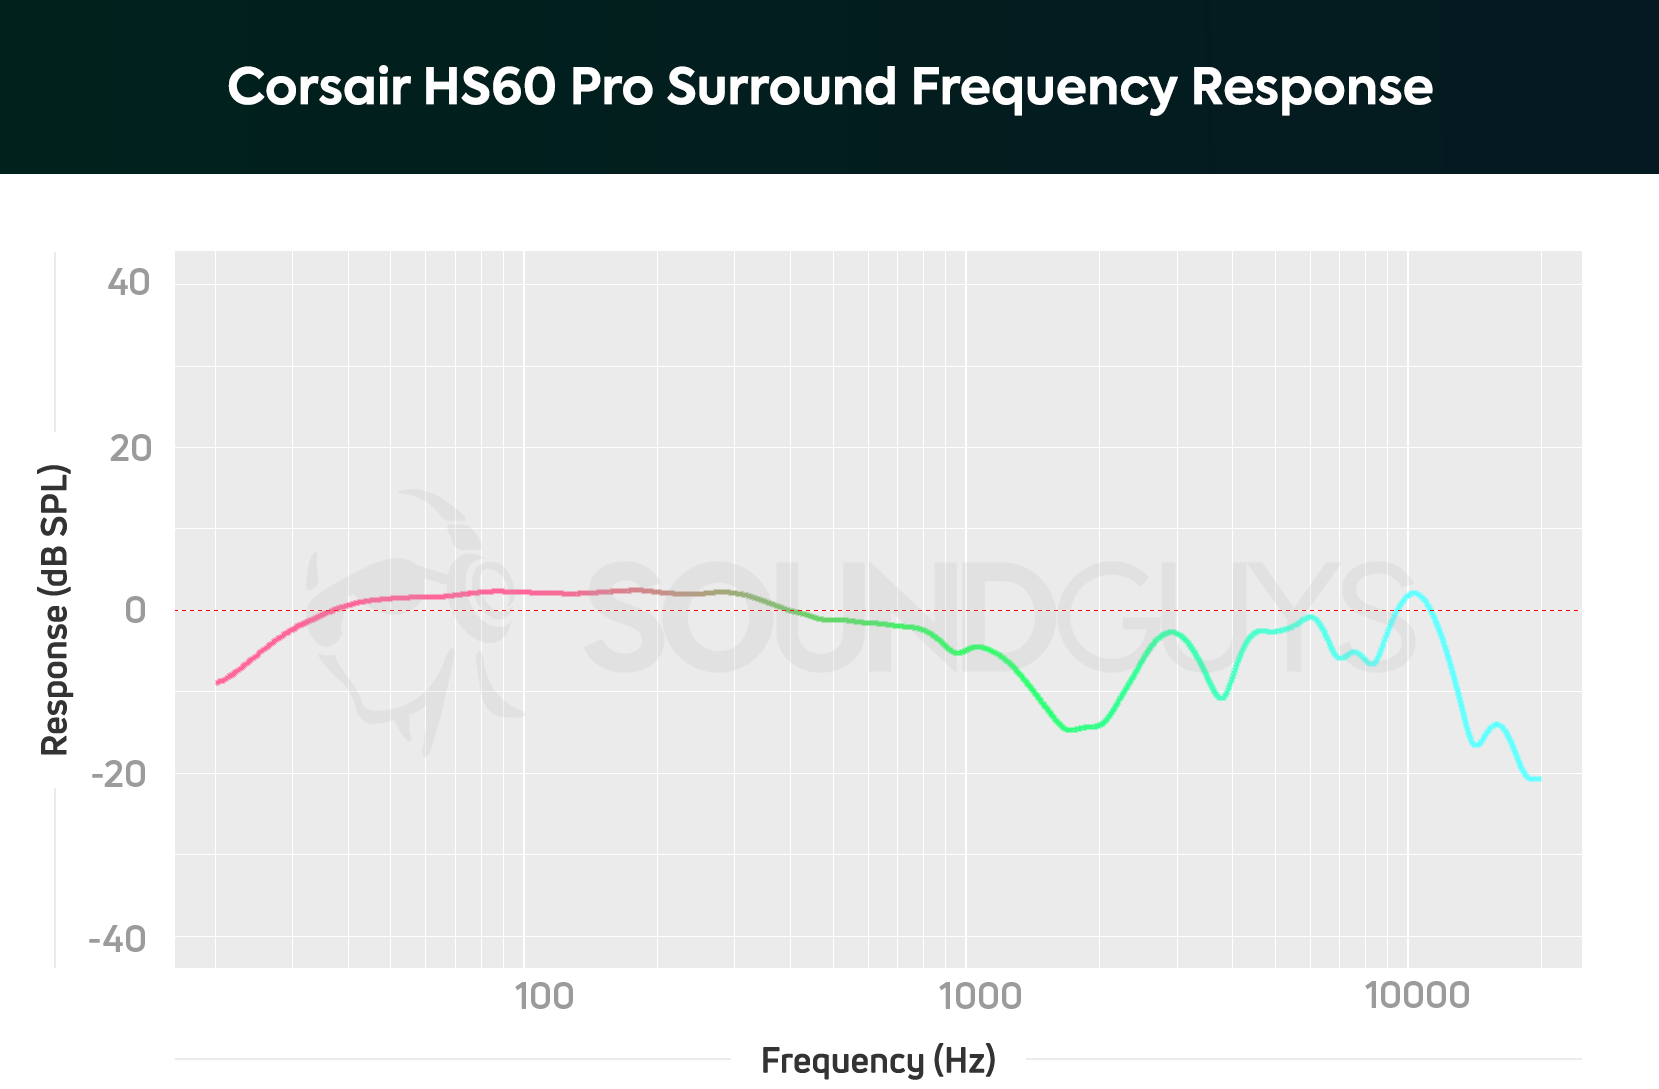 A frequency response chart for the Corsair HS60 Pro Surround.